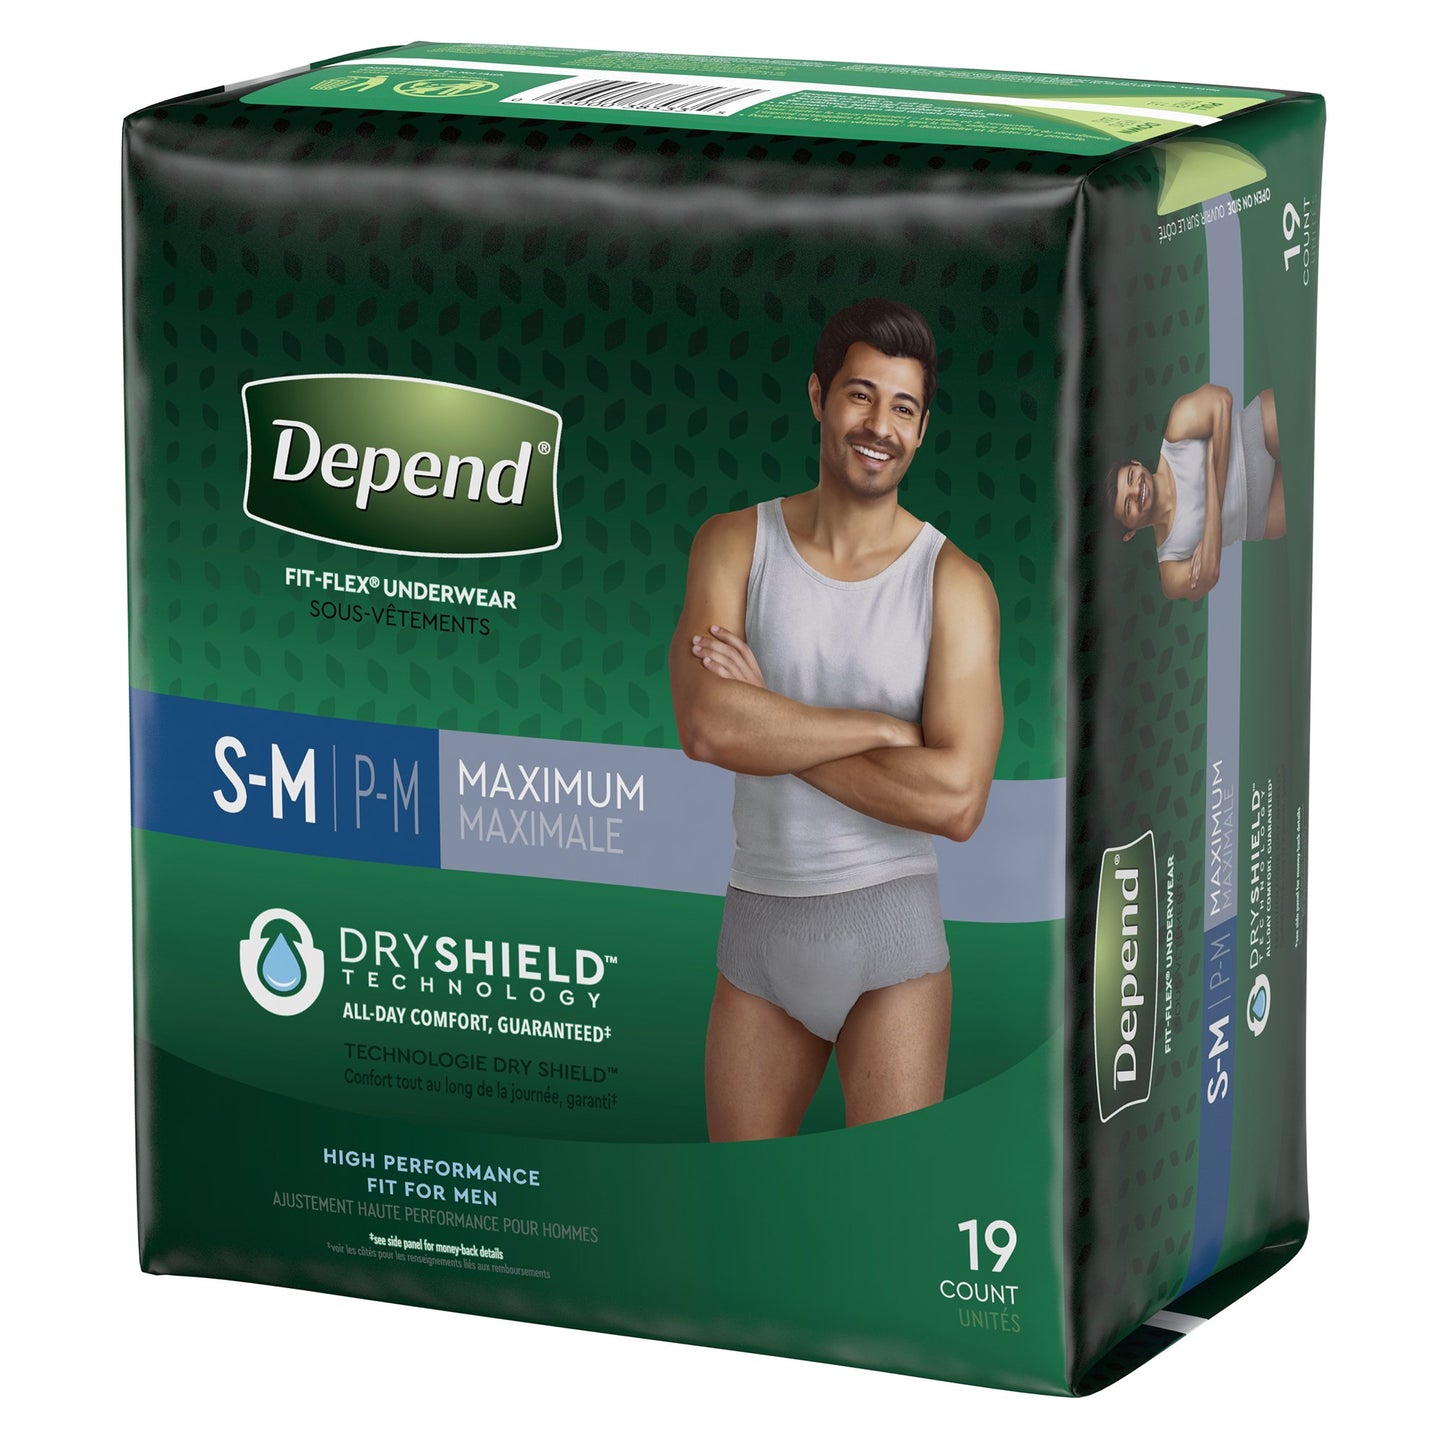 FSA-Approved Depend FIT-FLEX Absorbent Underwear for Men, Small/Medium,  Pull-On, Gray, Disposable, 19EA ct – BuyFSA